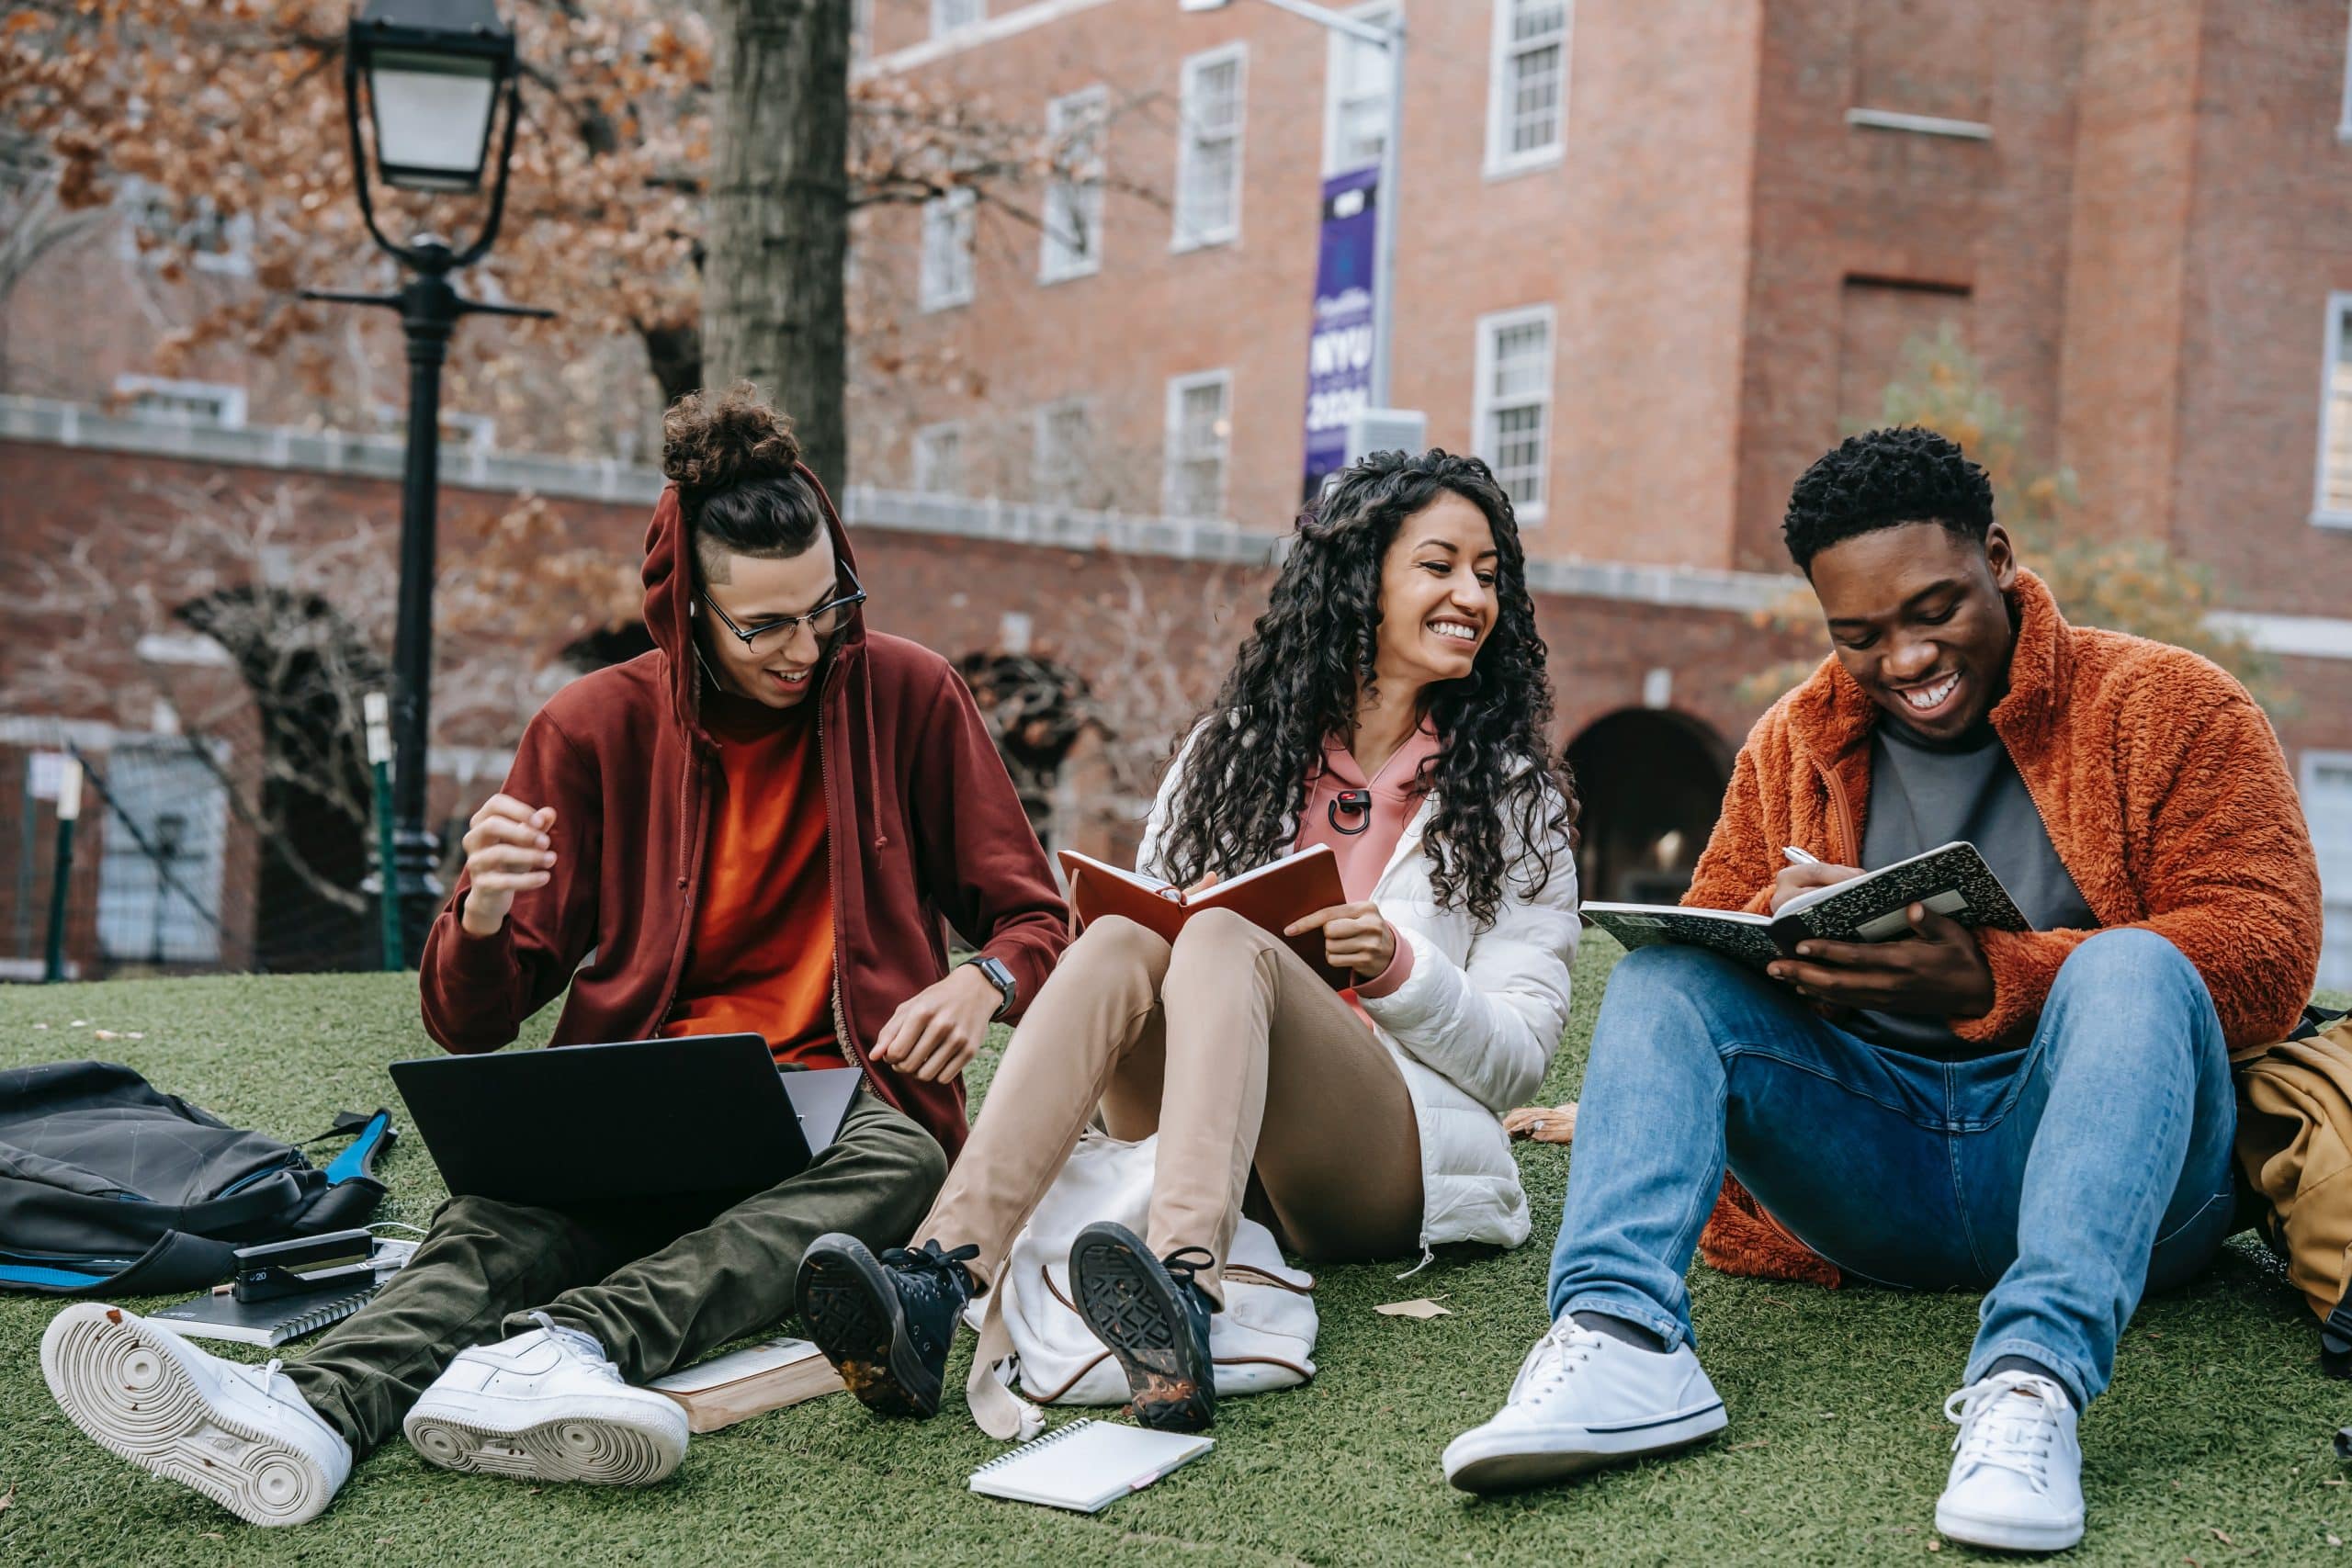 Three students studying and sharing ideas outdoors on a campus lawn in Canada.